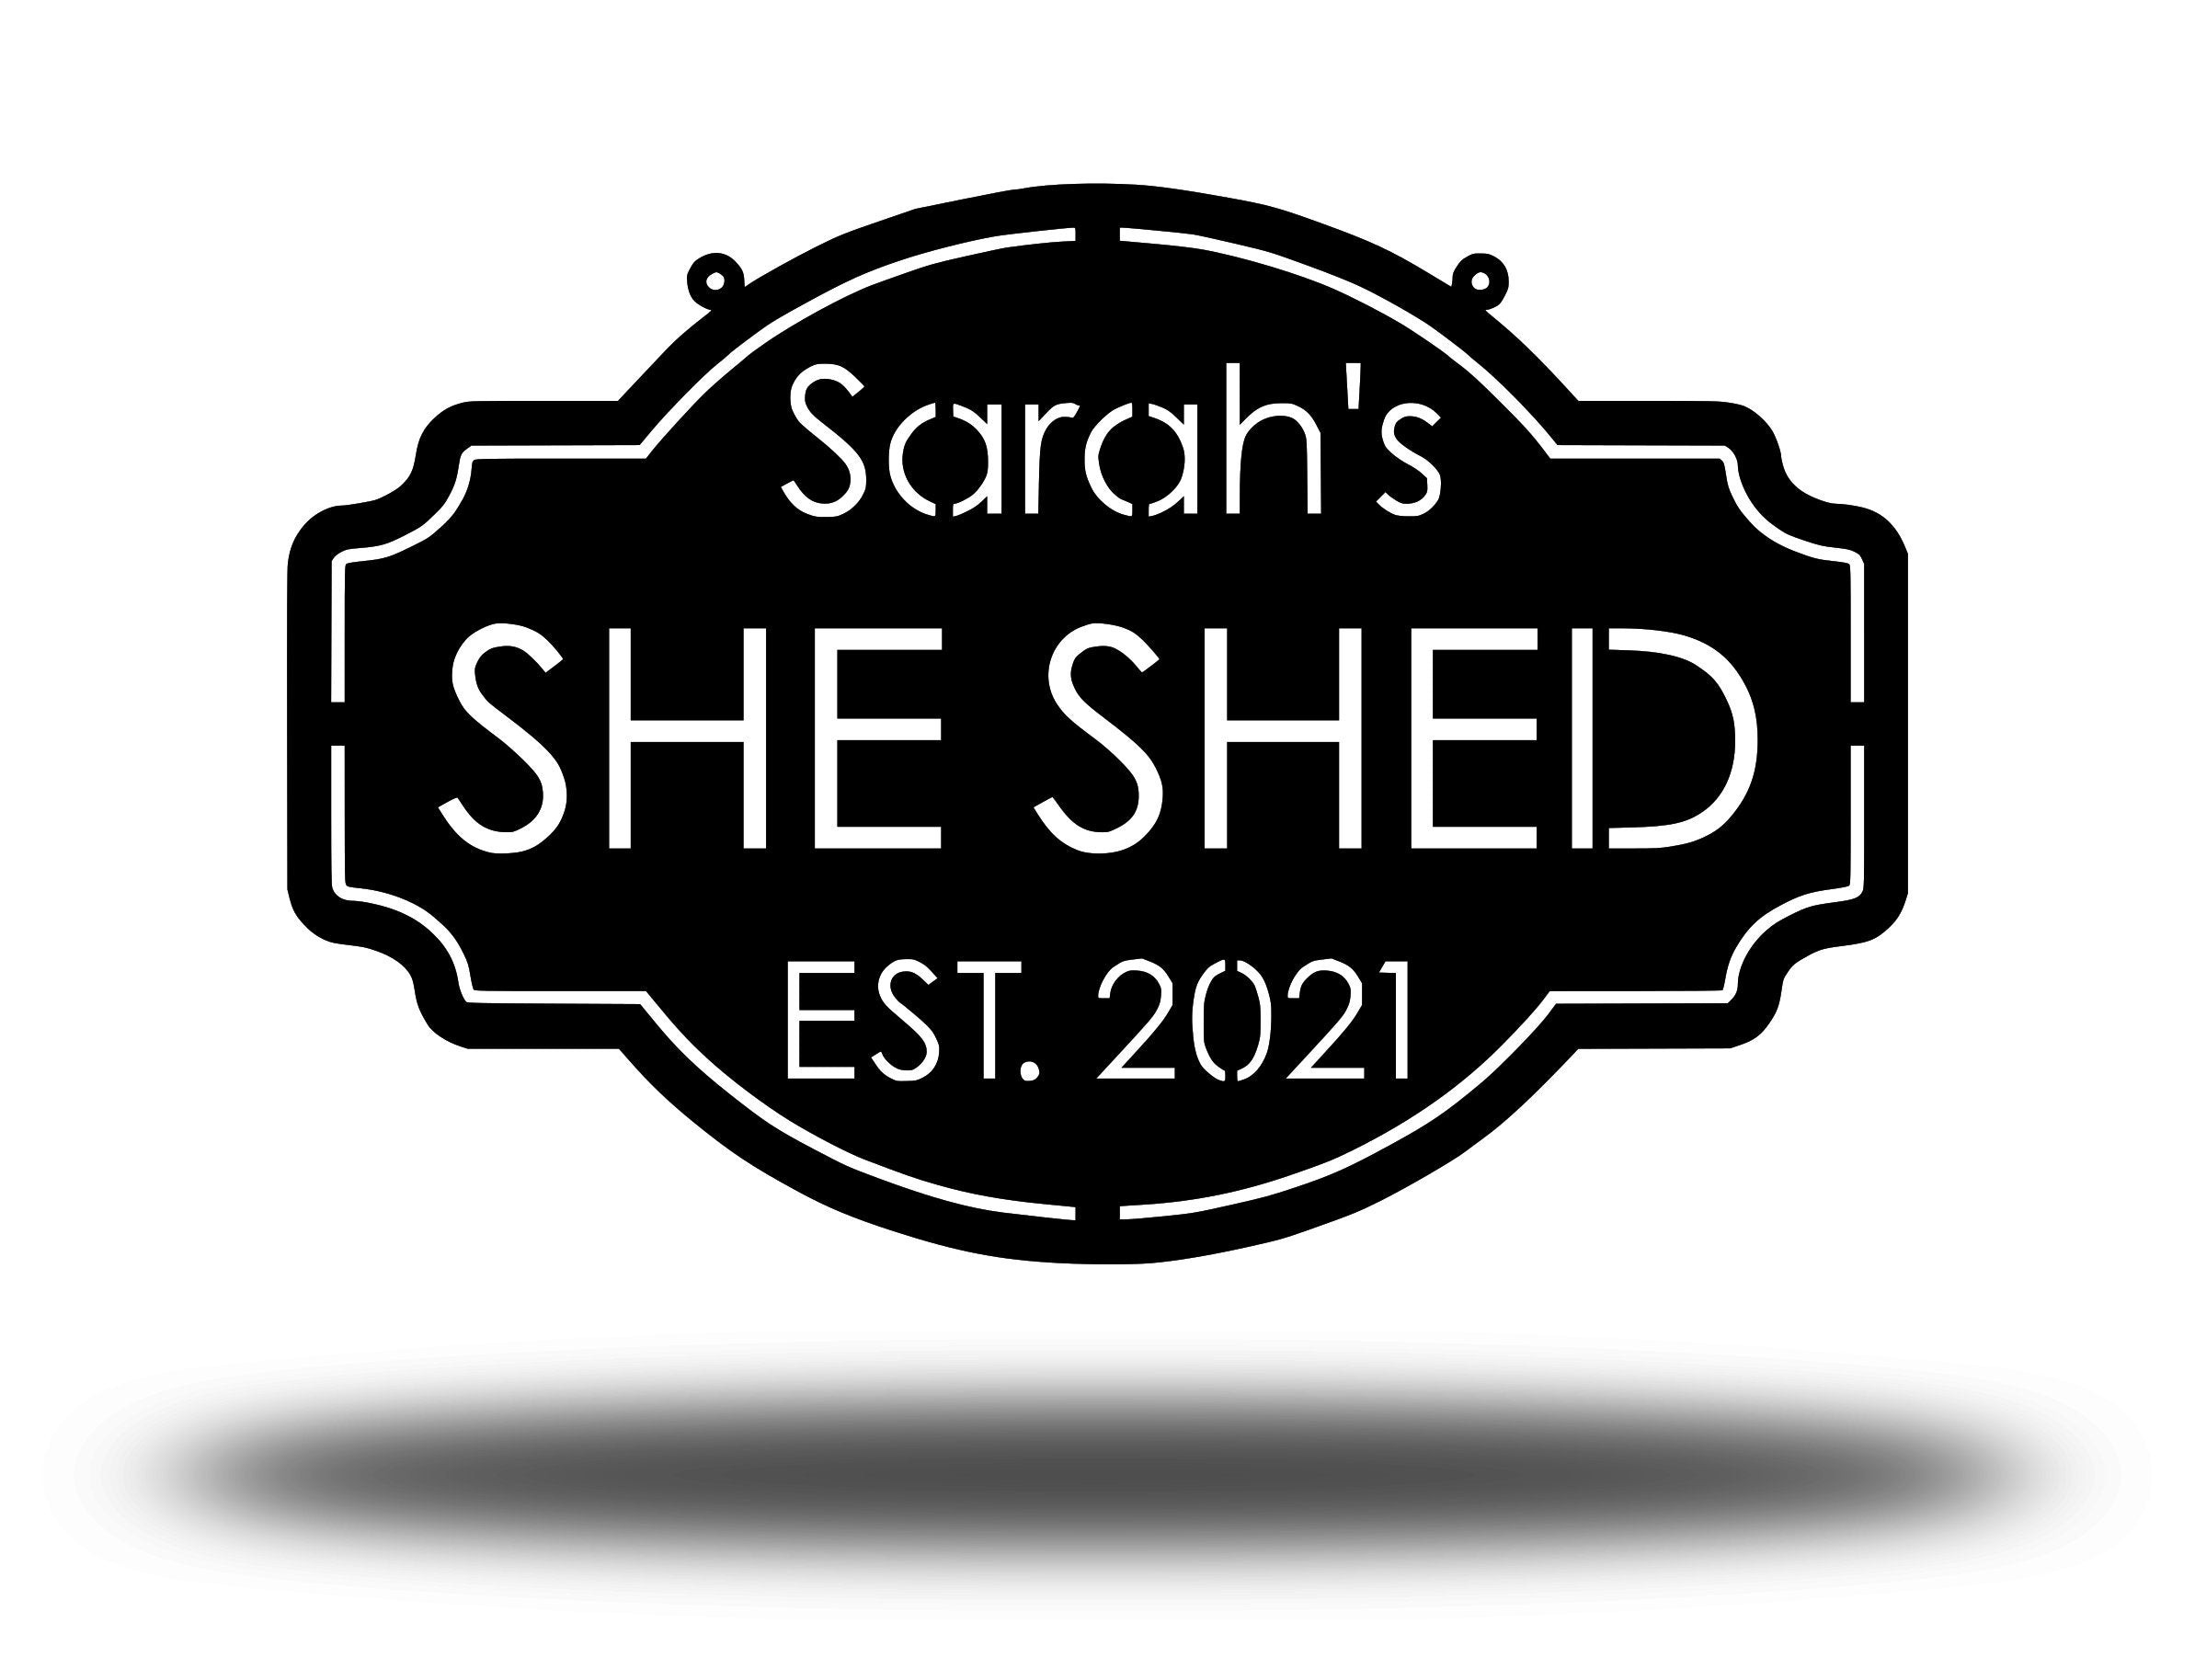 Personalized She Shed Sign, Est Sign, Custom She Shed Gift Idea, She Shed Wall Decor, Gift For Wife, Craft Room Decor Laser Cut Metal Signs Custom Gift Ideas 14x14IN